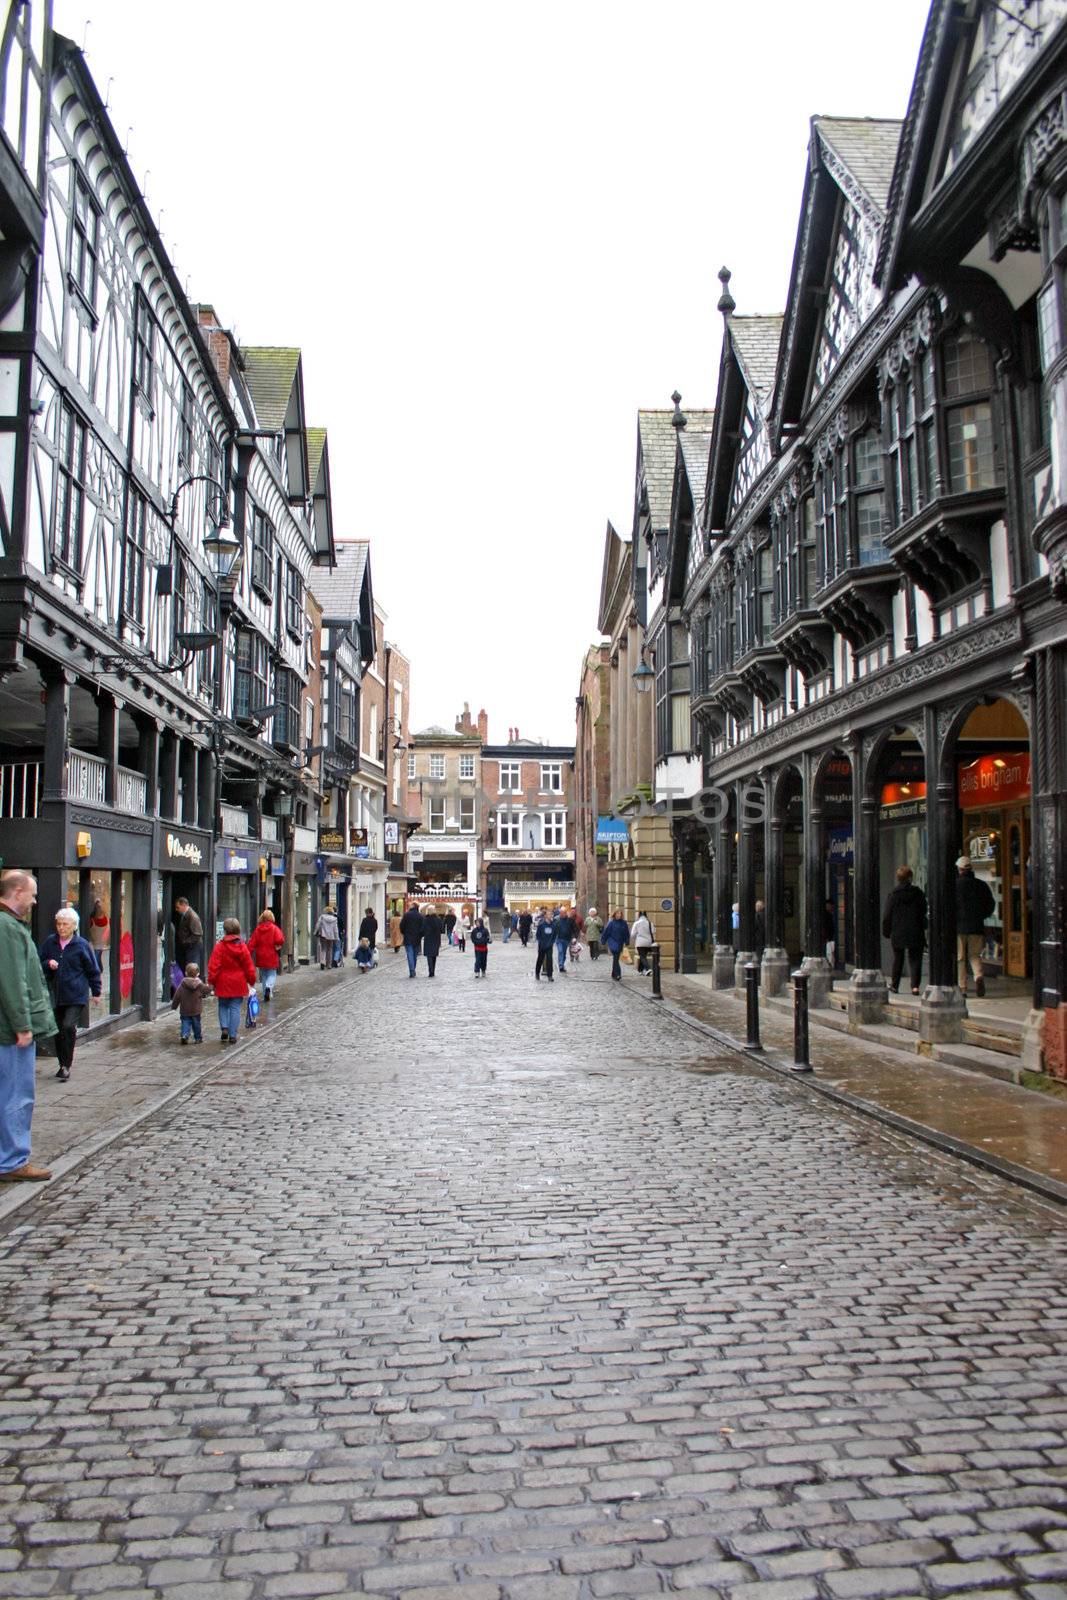 Wet Shopping Day in Chester by green308